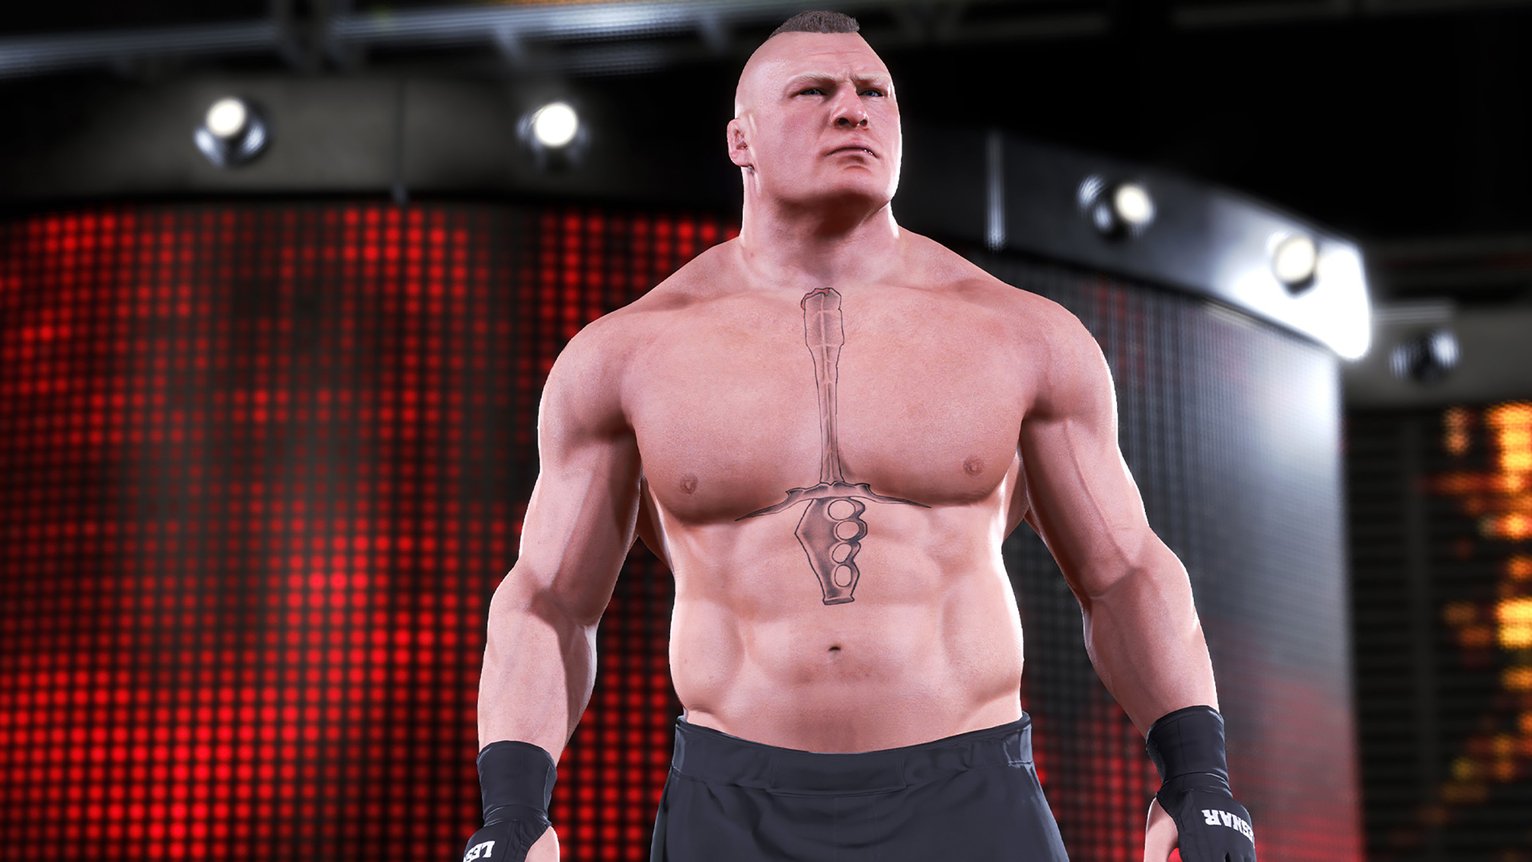 WWE 2K20 PS4 Game Review